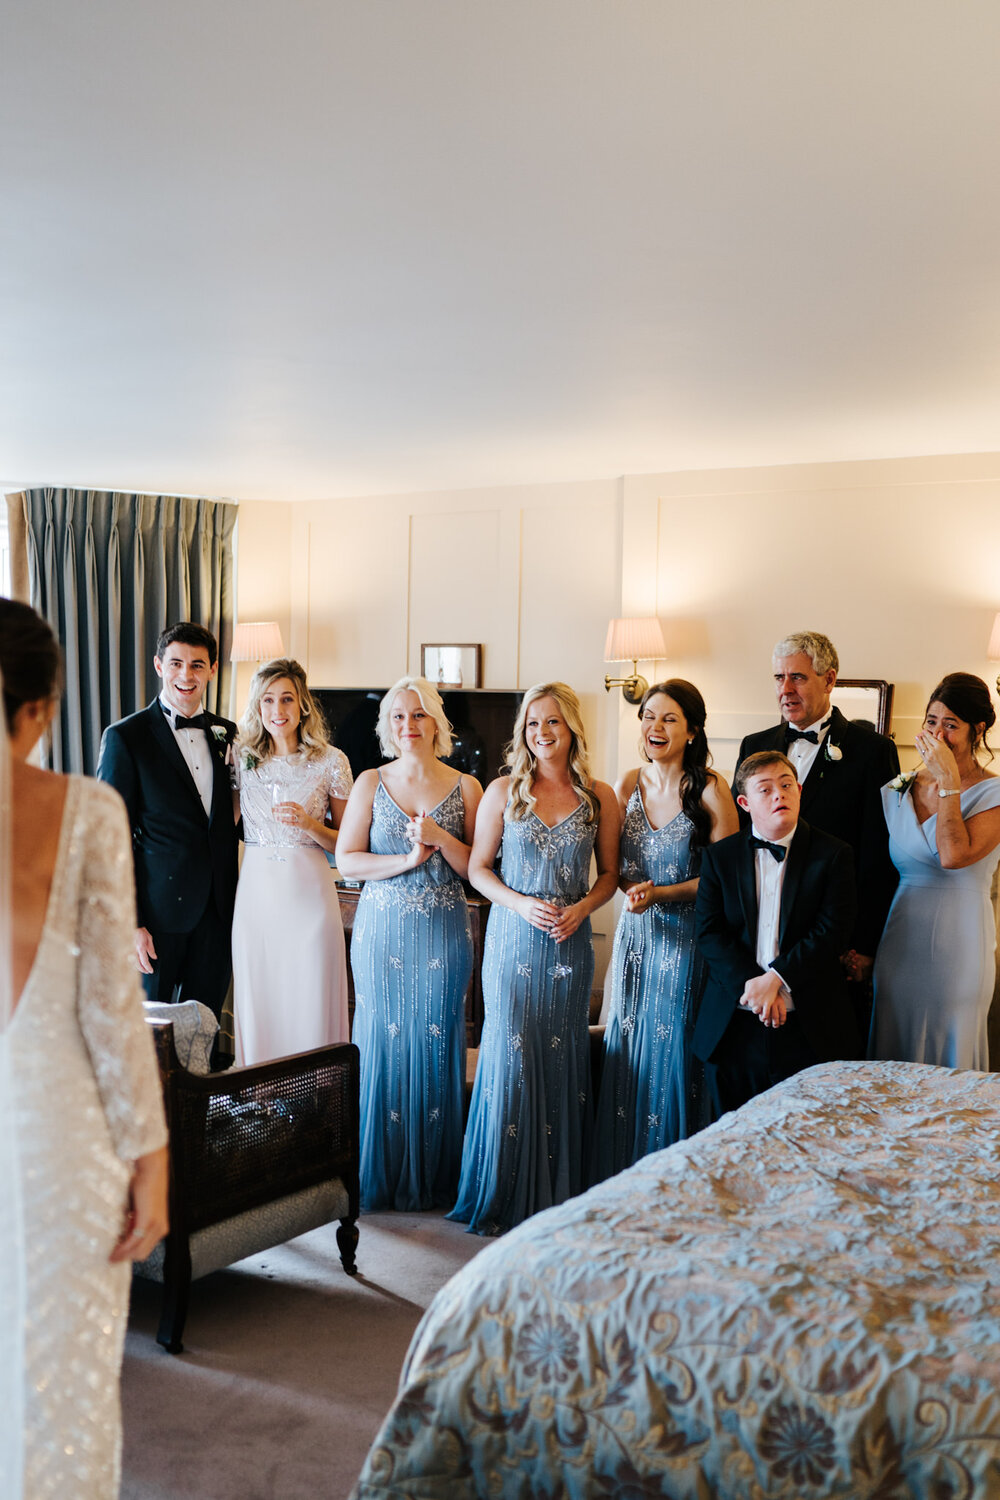 Bridesmaids and parents of the bride react joyfully to seeing bride in her dress